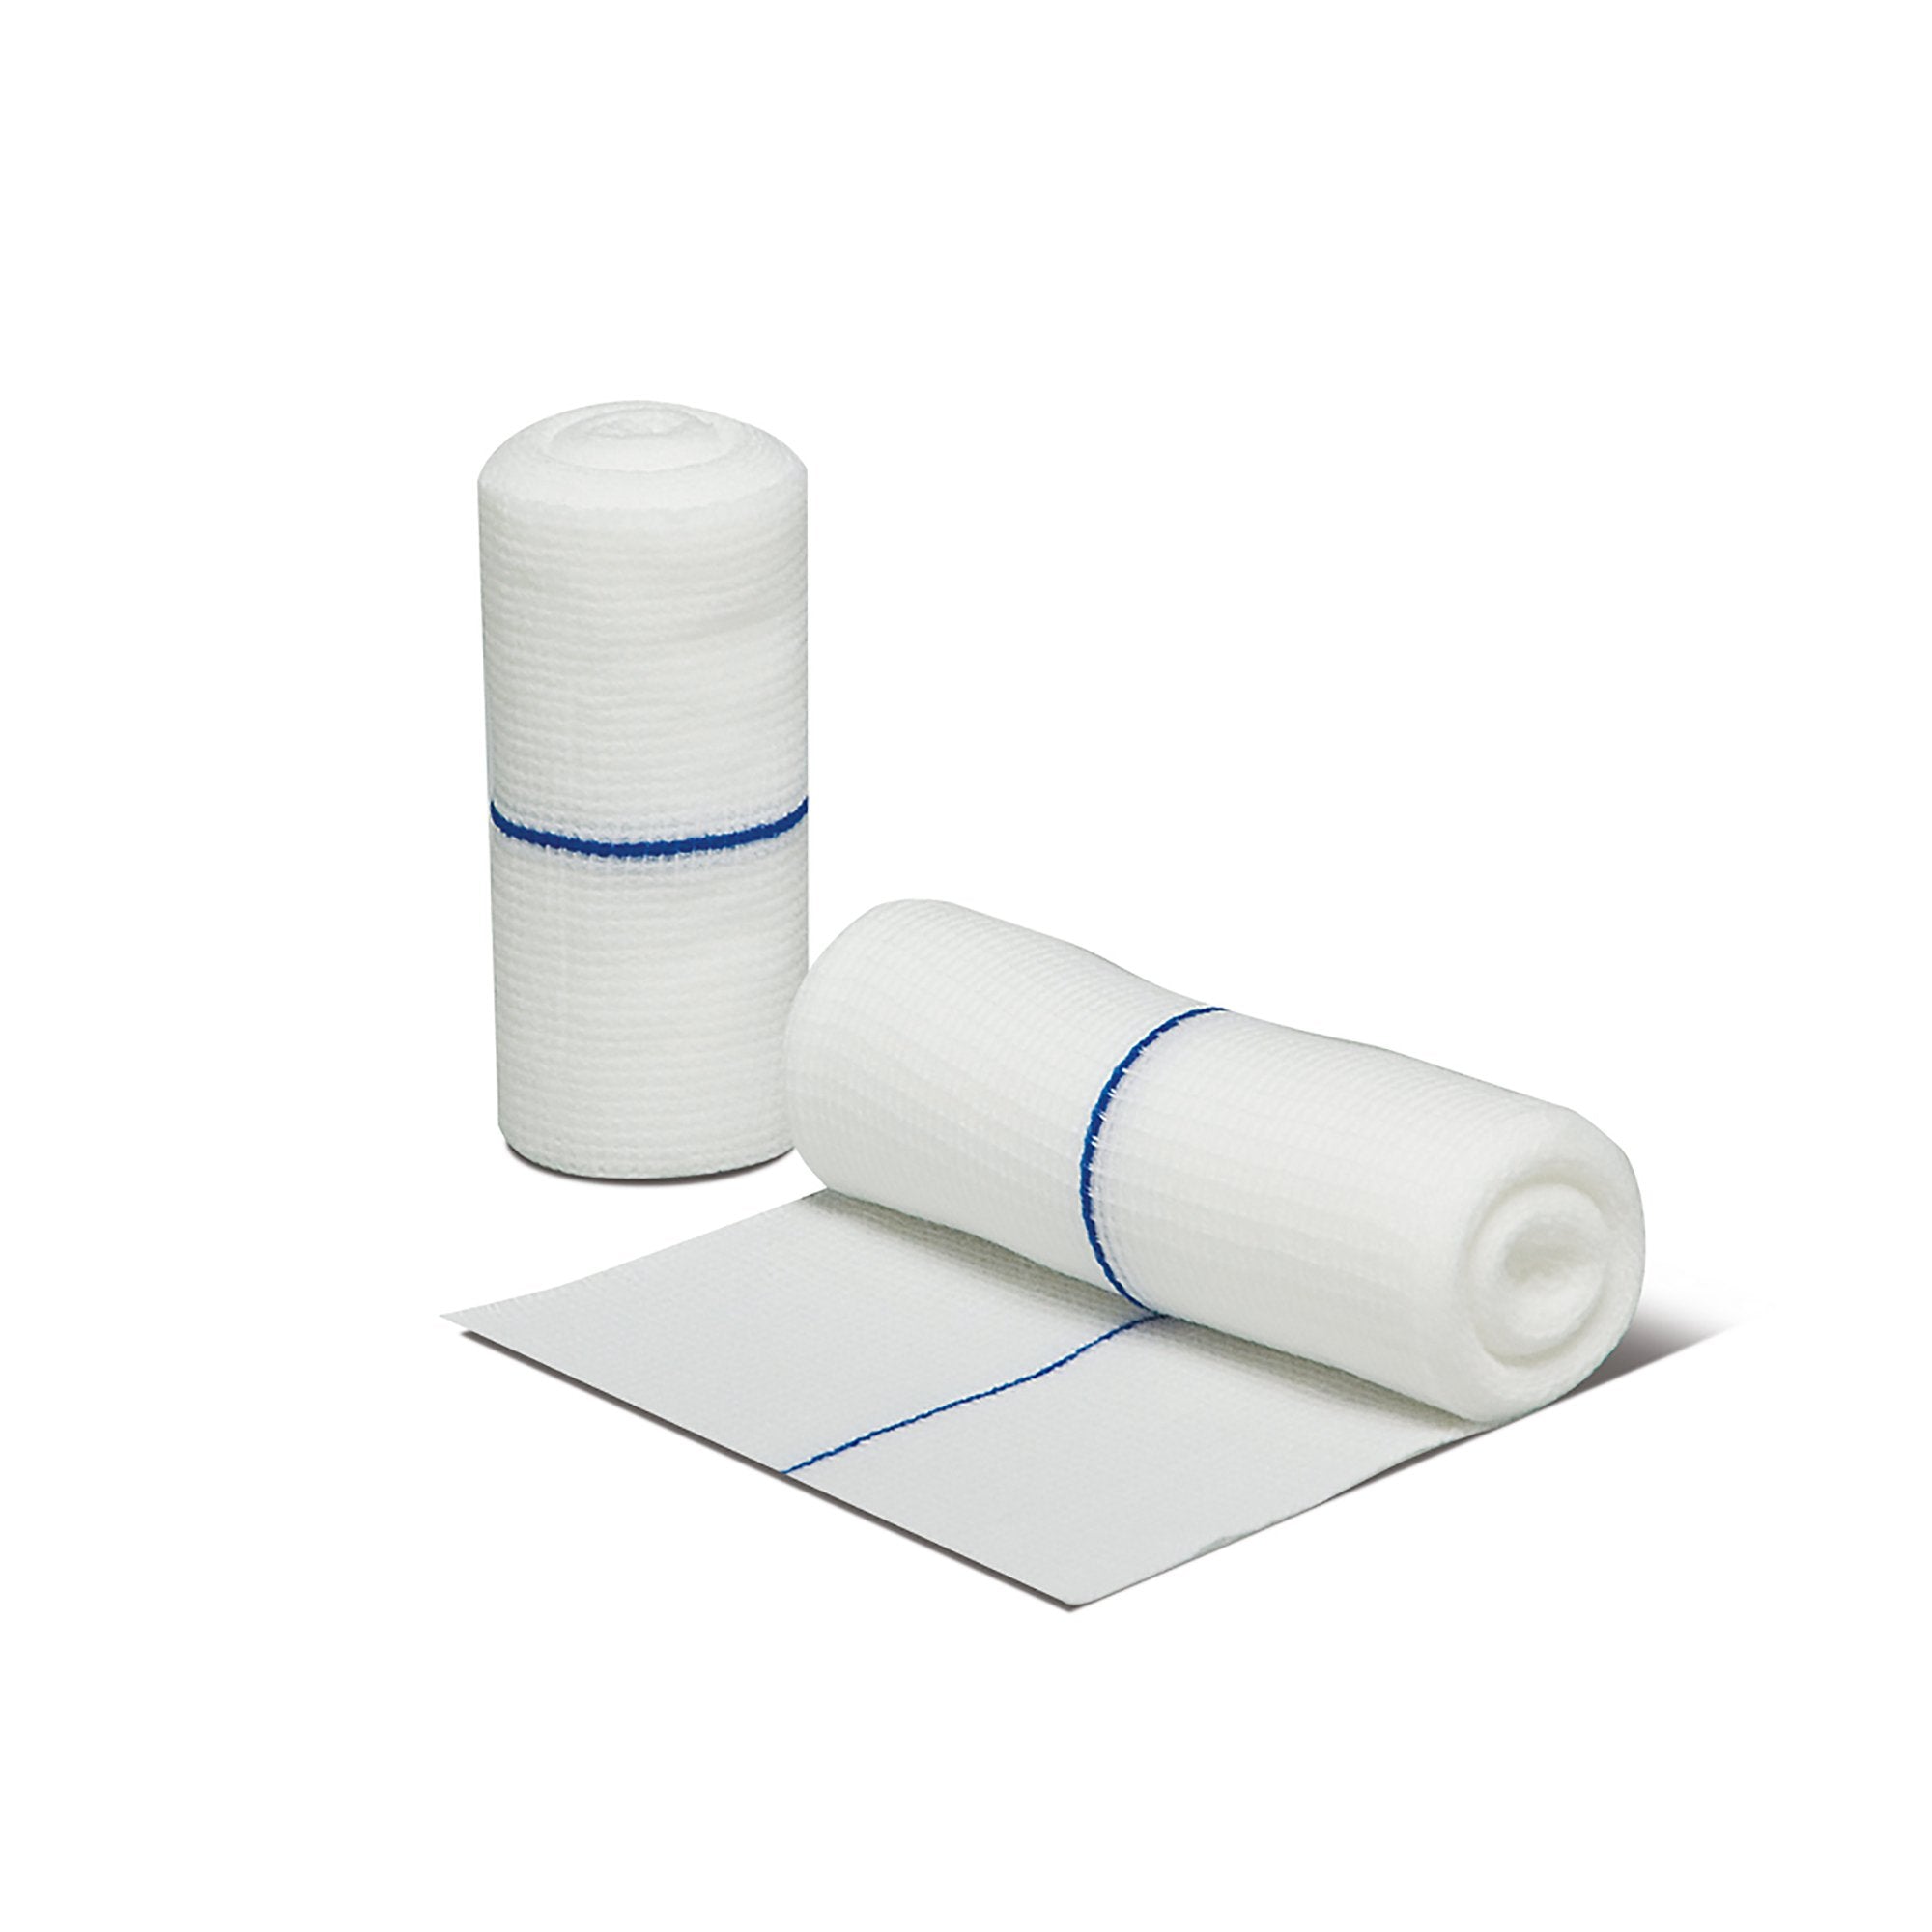 Conforming Bandage Flexicon® 1 Inch X 4-1/10 Yard 1 per Pack Sterile 1-Ply Roll Shape